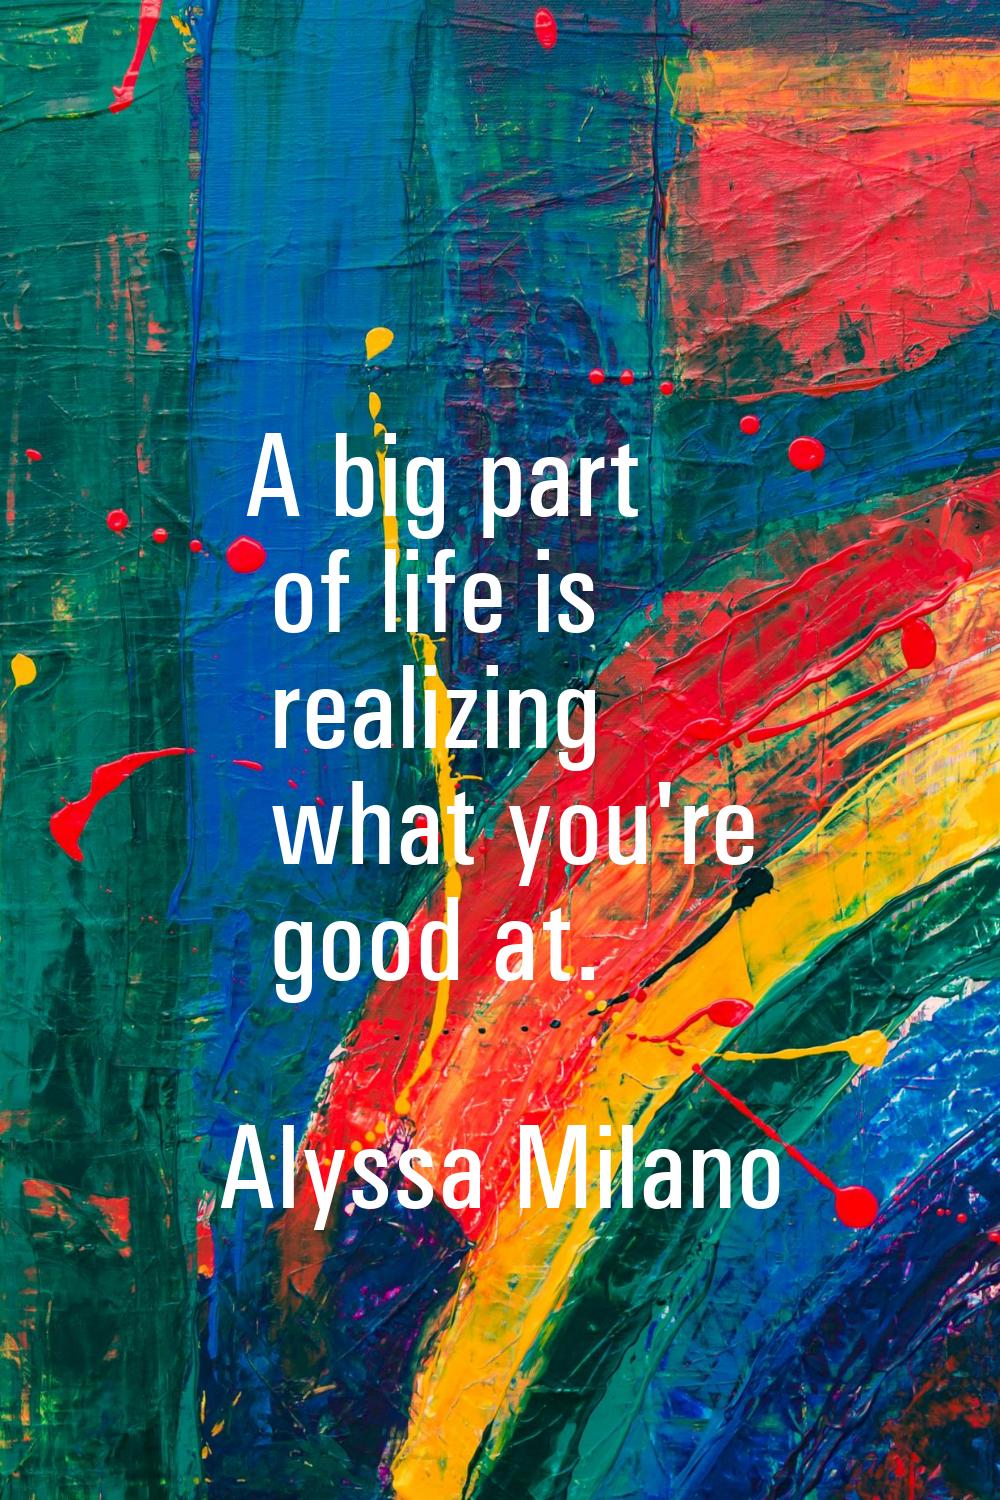 A big part of life is realizing what you're good at.